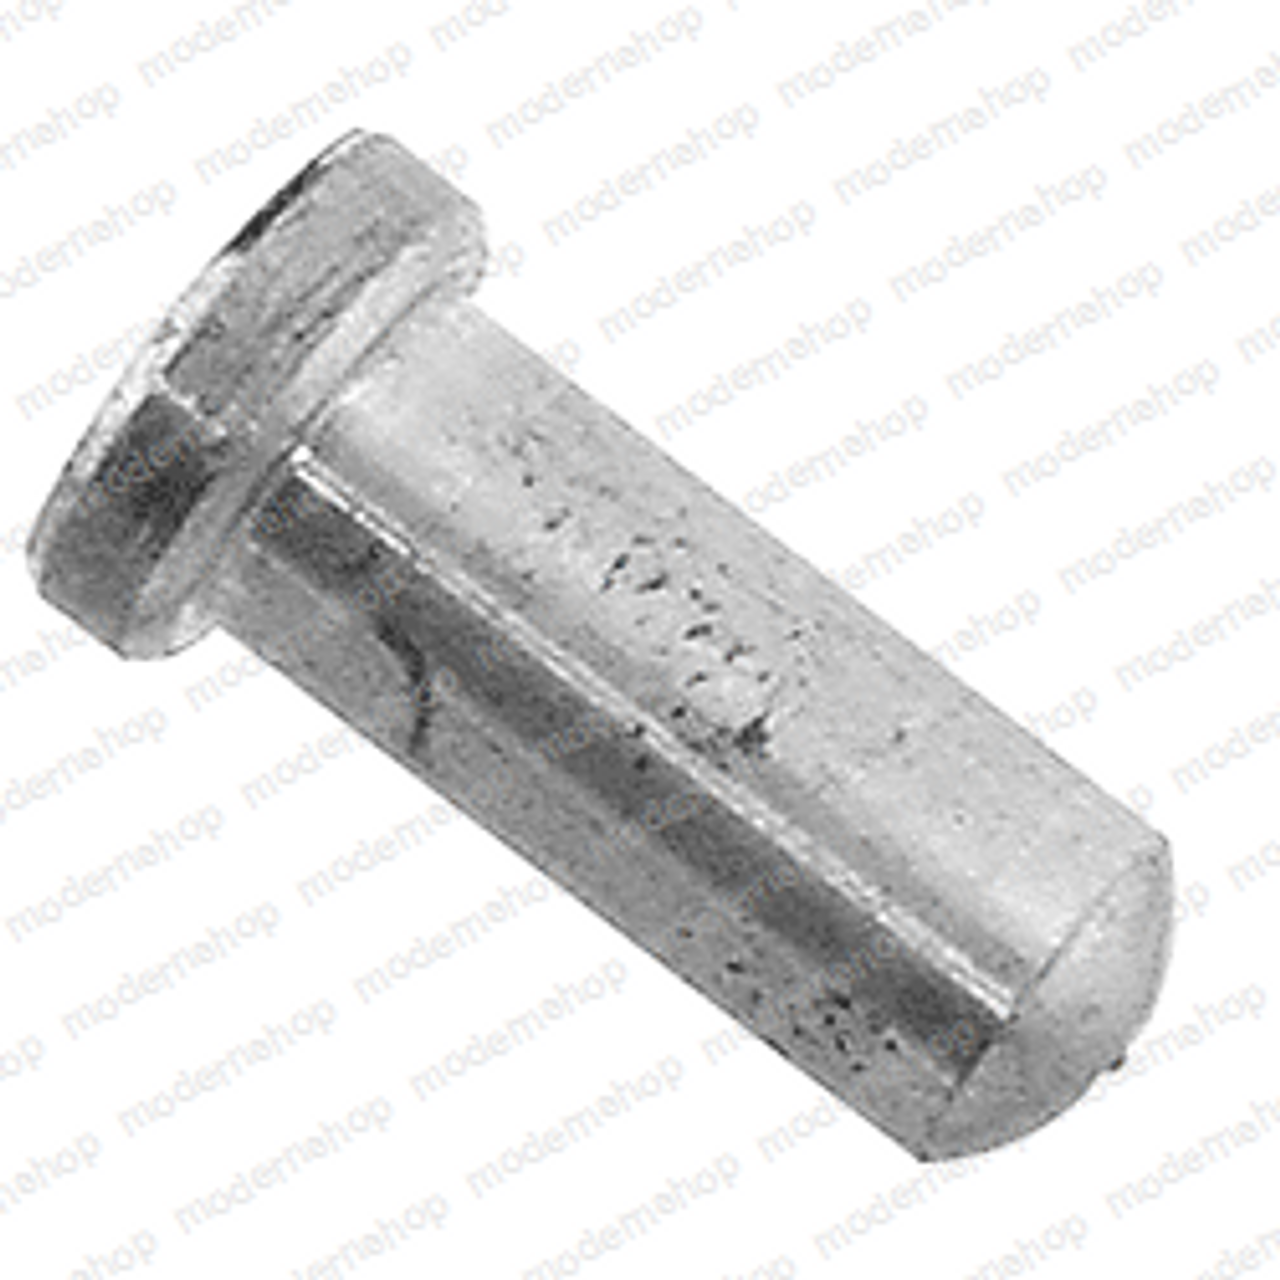 280C2-42351: TCM Forklift CONTACT - HORN